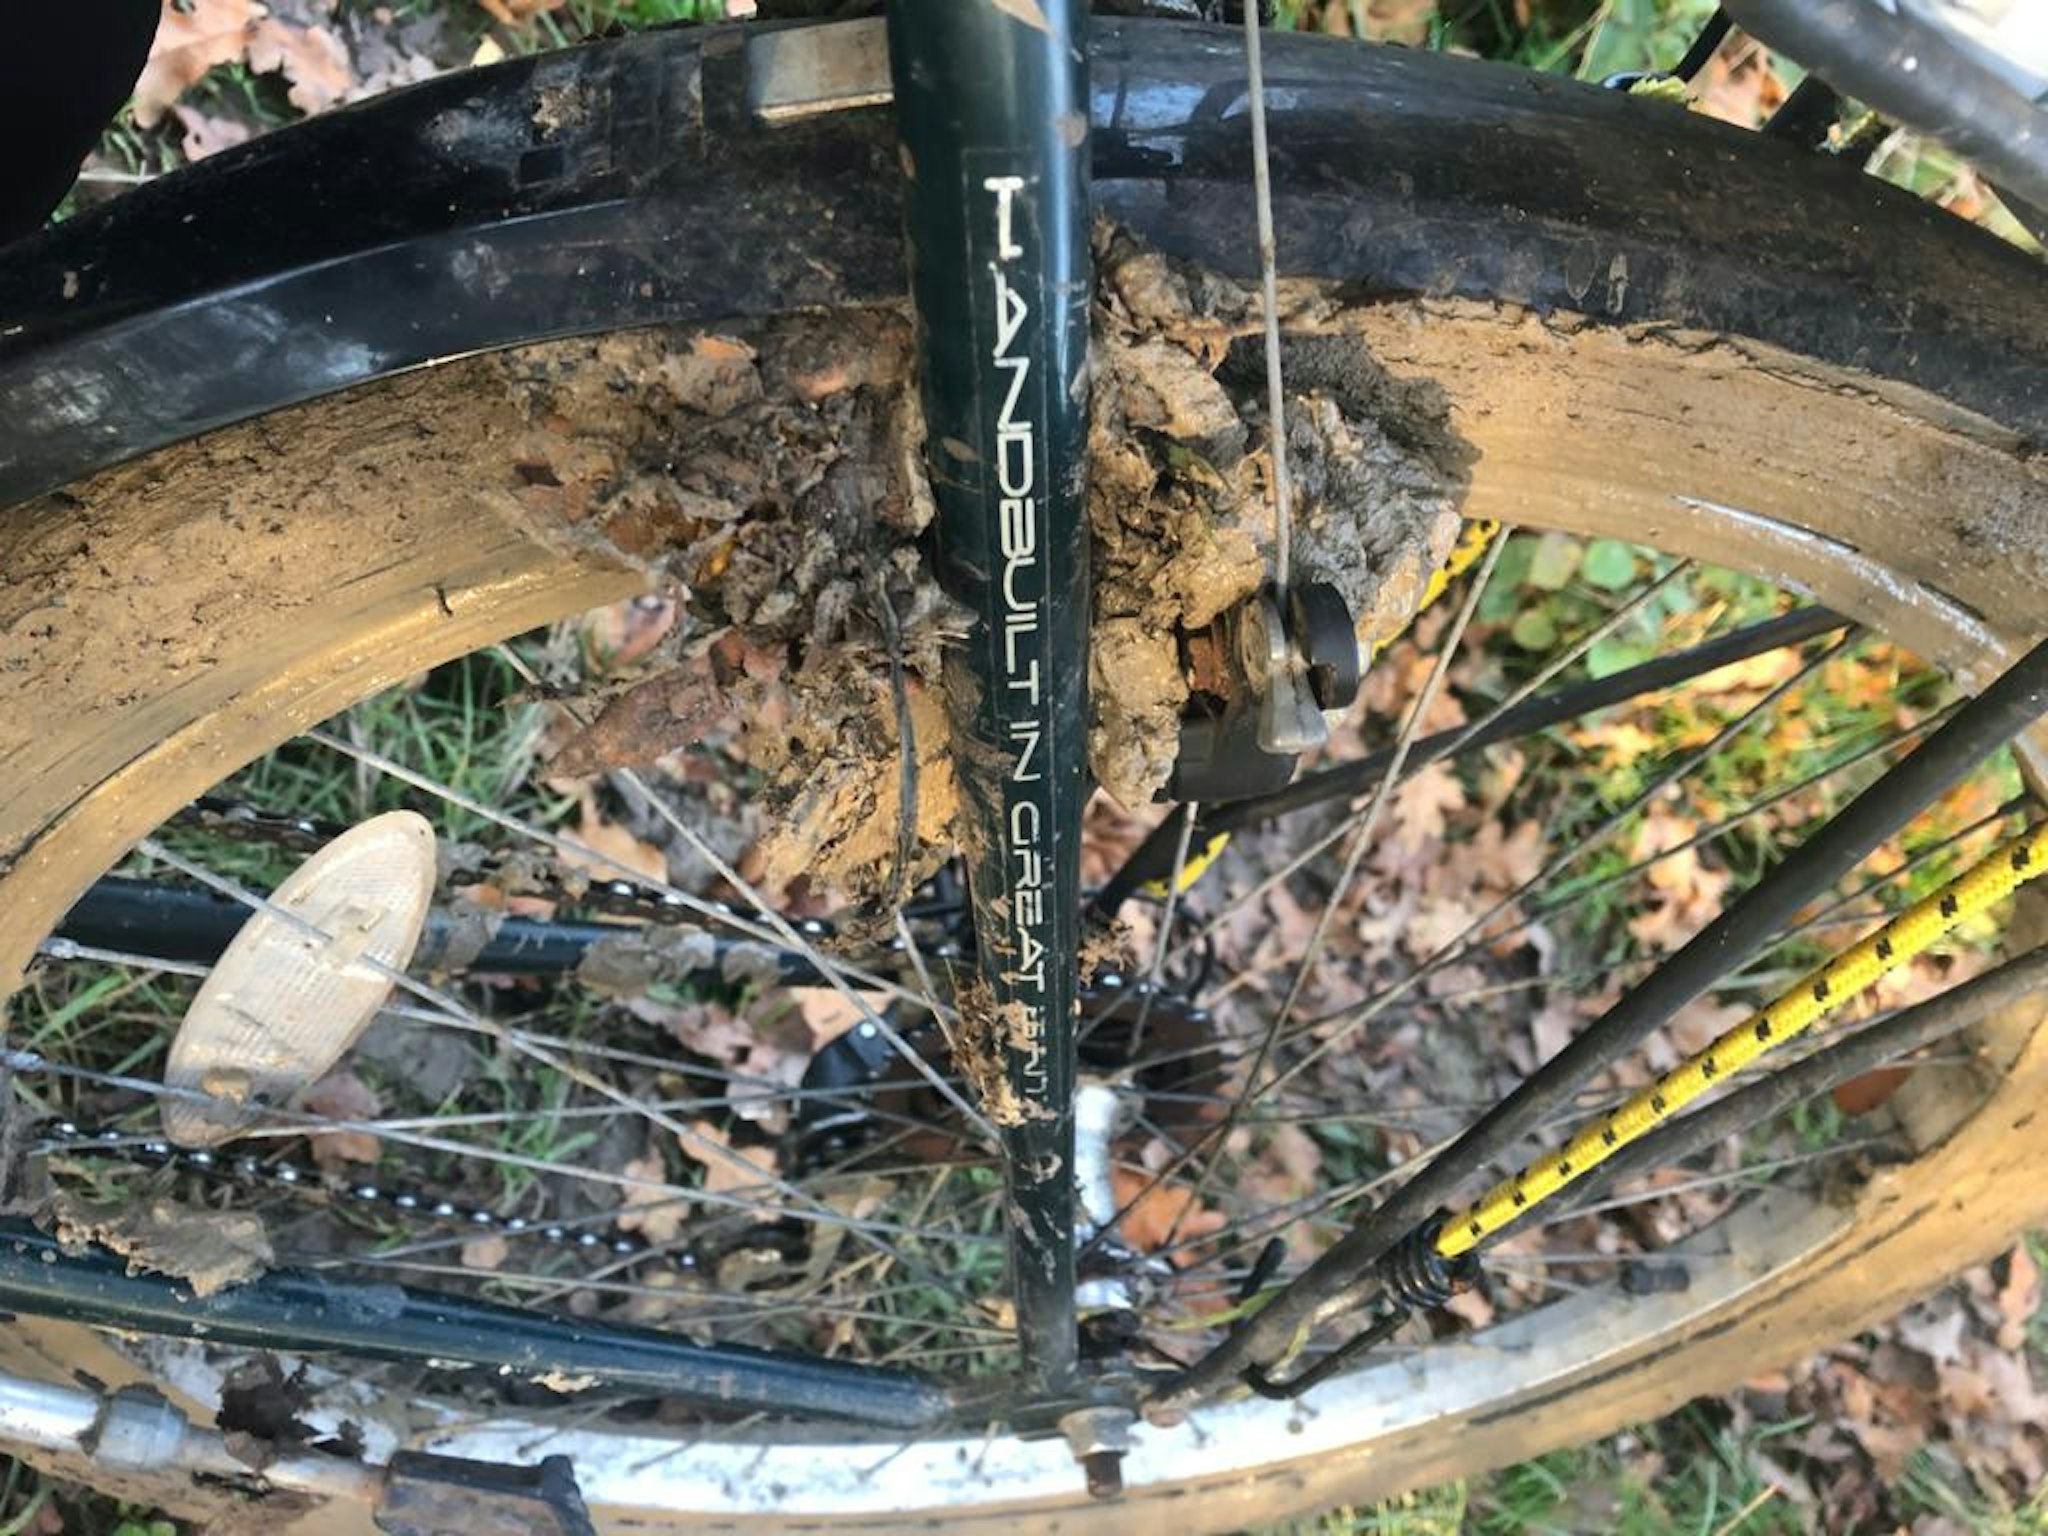 Bicycle fork with brakes clogged up with lots of mud